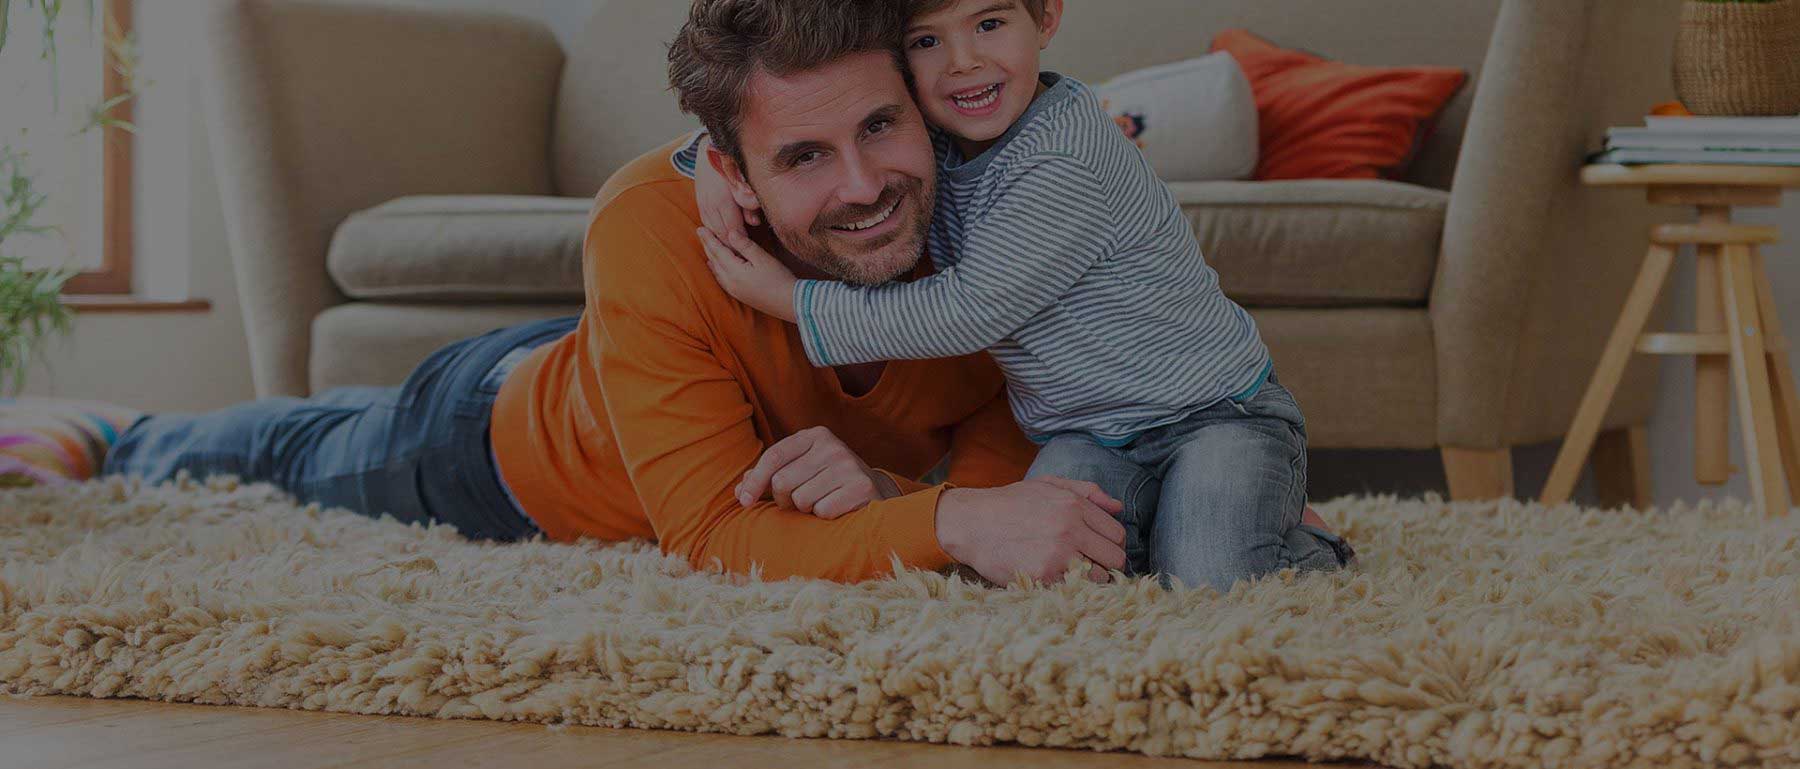 Glasgow-Carpet-Cleaning